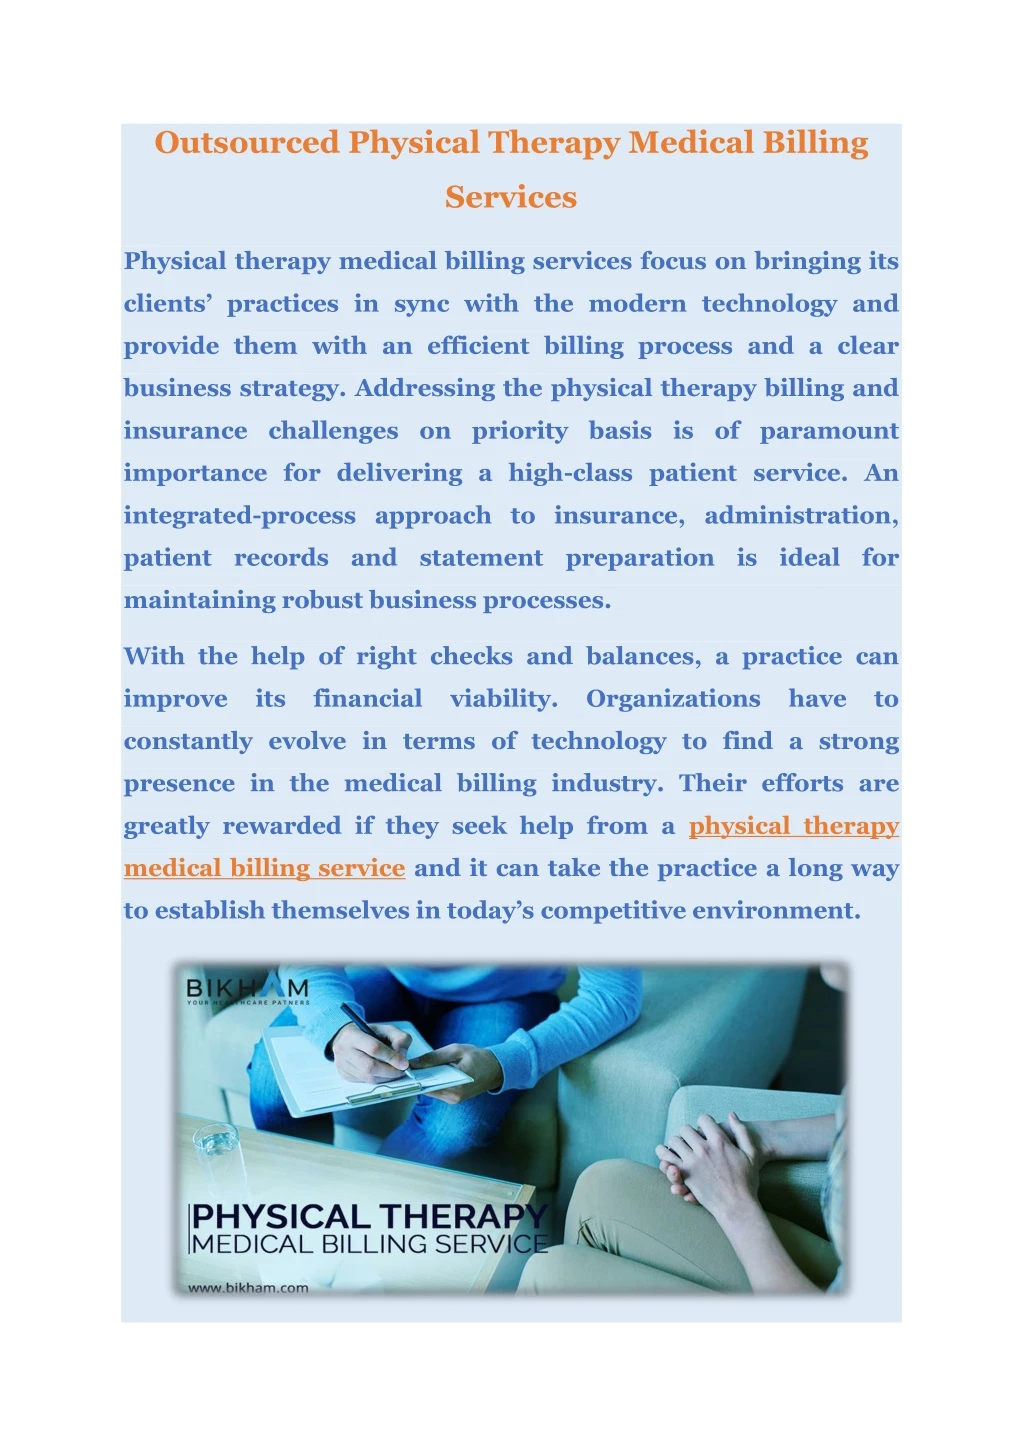 outsourced physical therapy medical billing